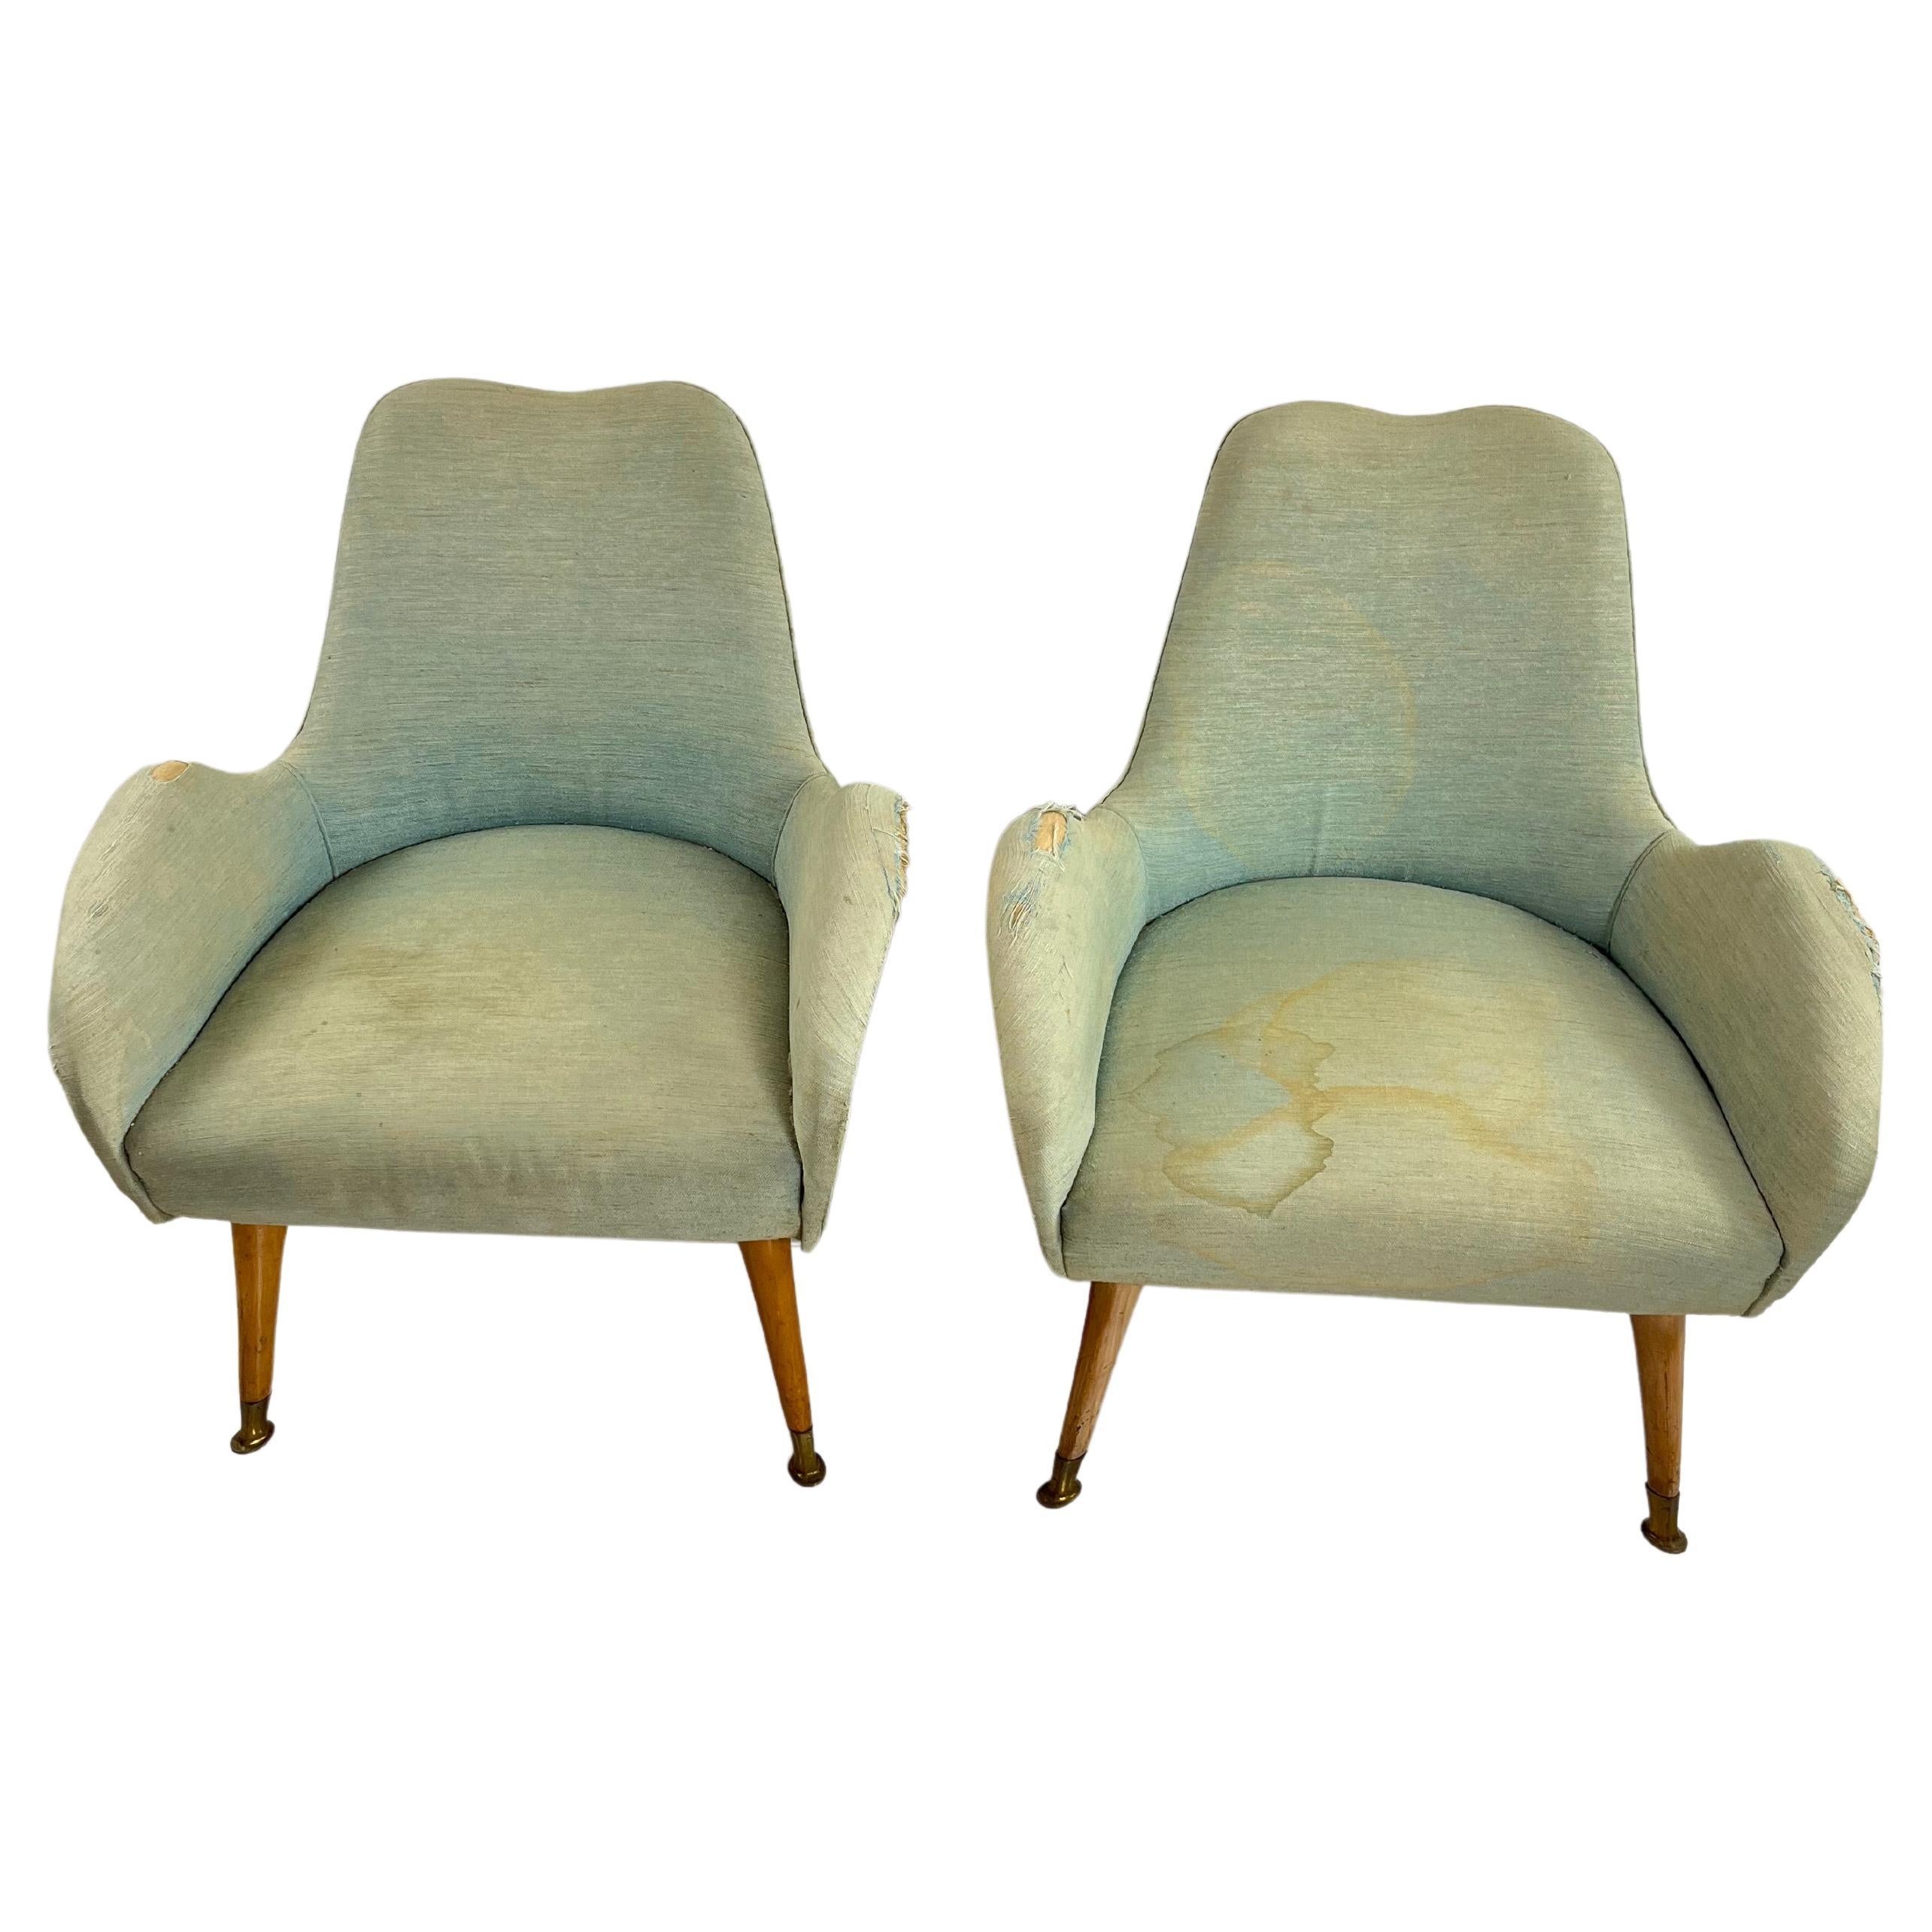 Pair of Mid-Century Armchairs Attributed To Federico Munari 1950s For Sale